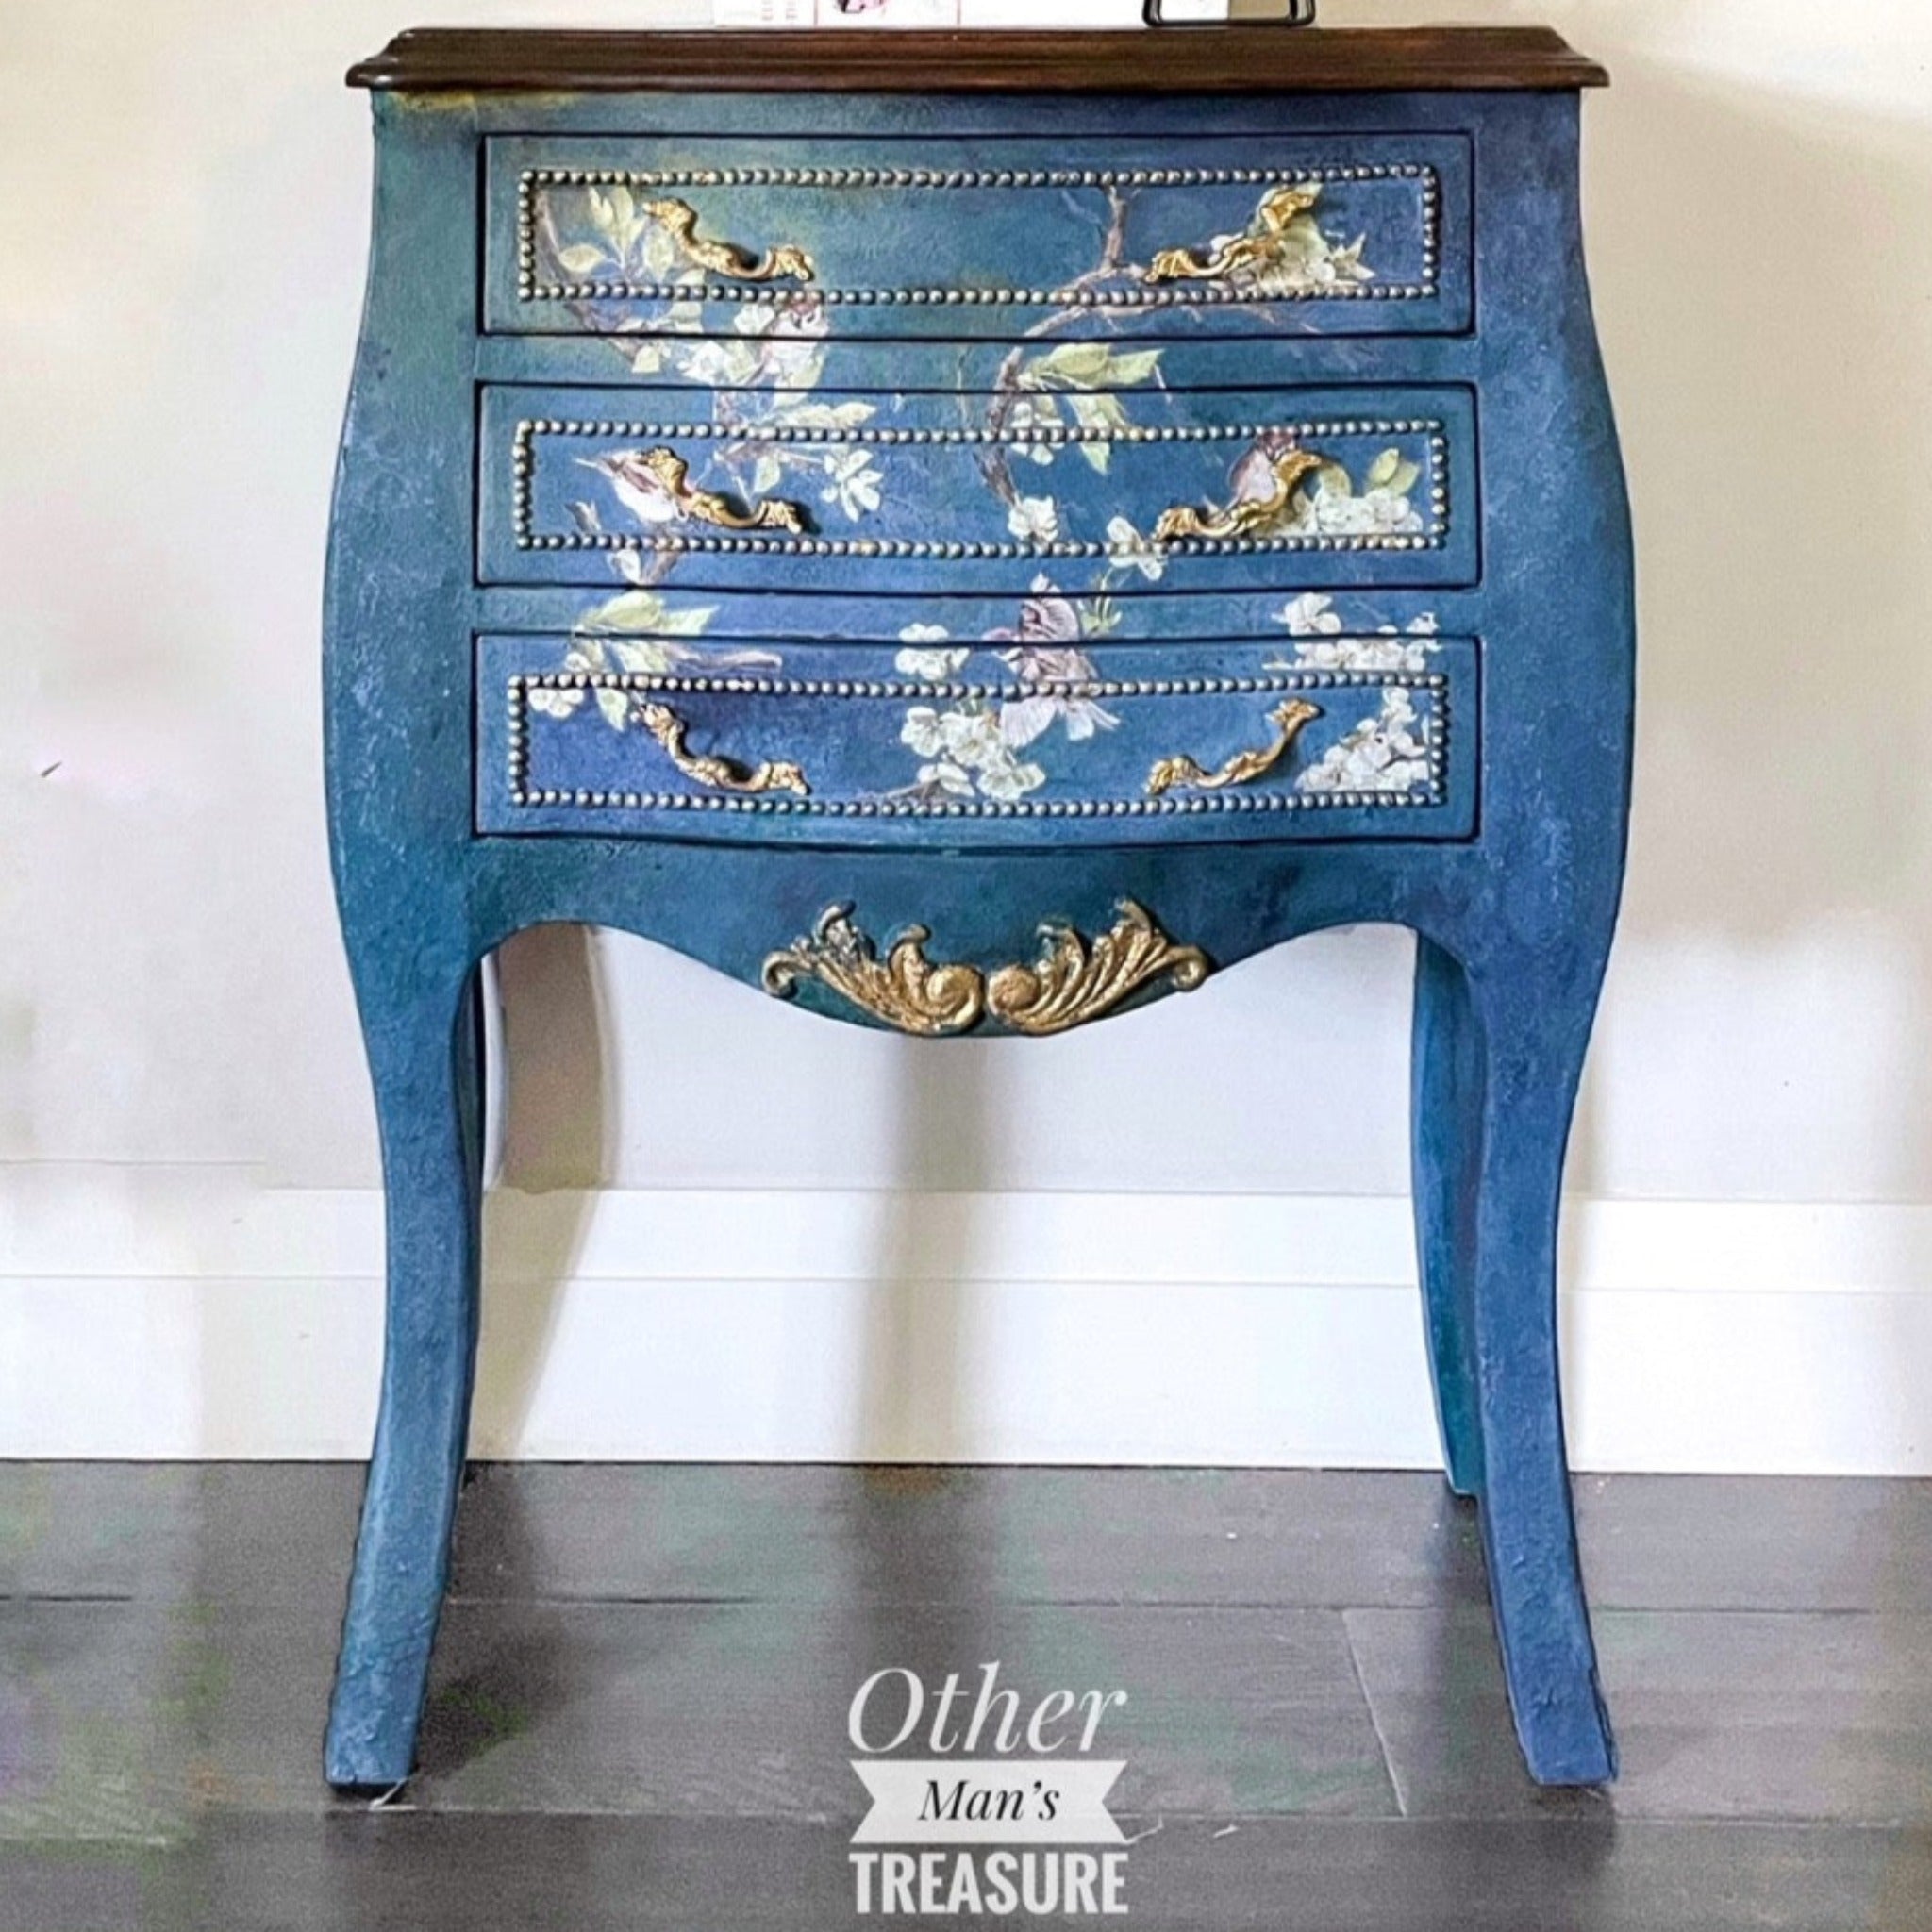 A vintage Bombay style nightstand refurbished by Other Man's Treasure is painted blue with gold accents and features ReDesign with Prima's Blossom Flight transfer on its small 3 front drawers.